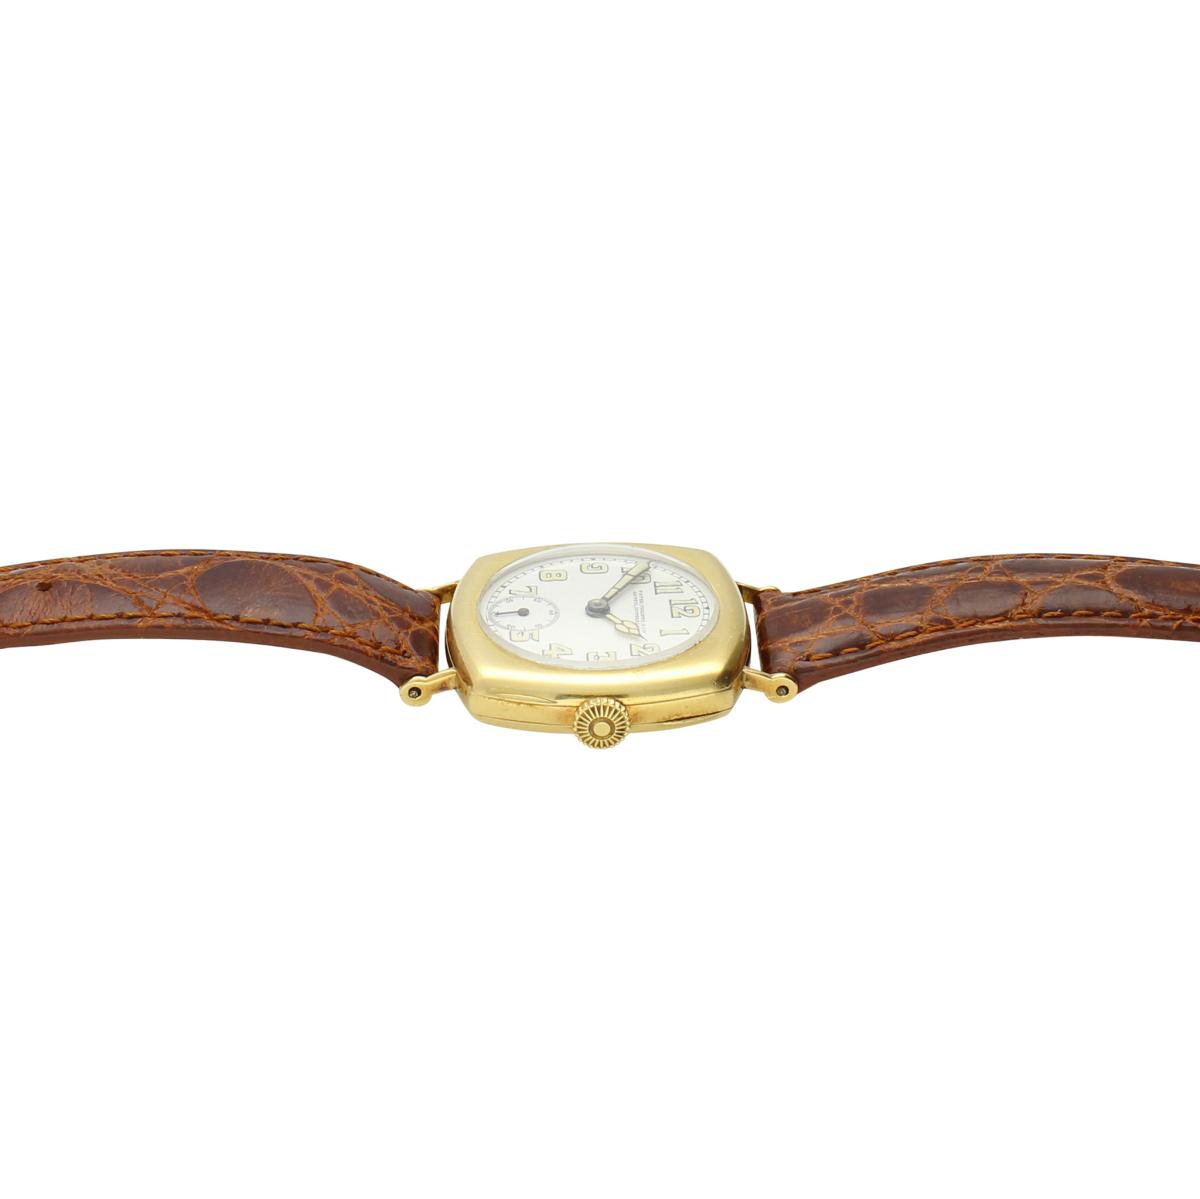 Patek Philippe 18ct Yellow Gold Cushion Cased Wristwatch with Enamel Dial. Made 1920